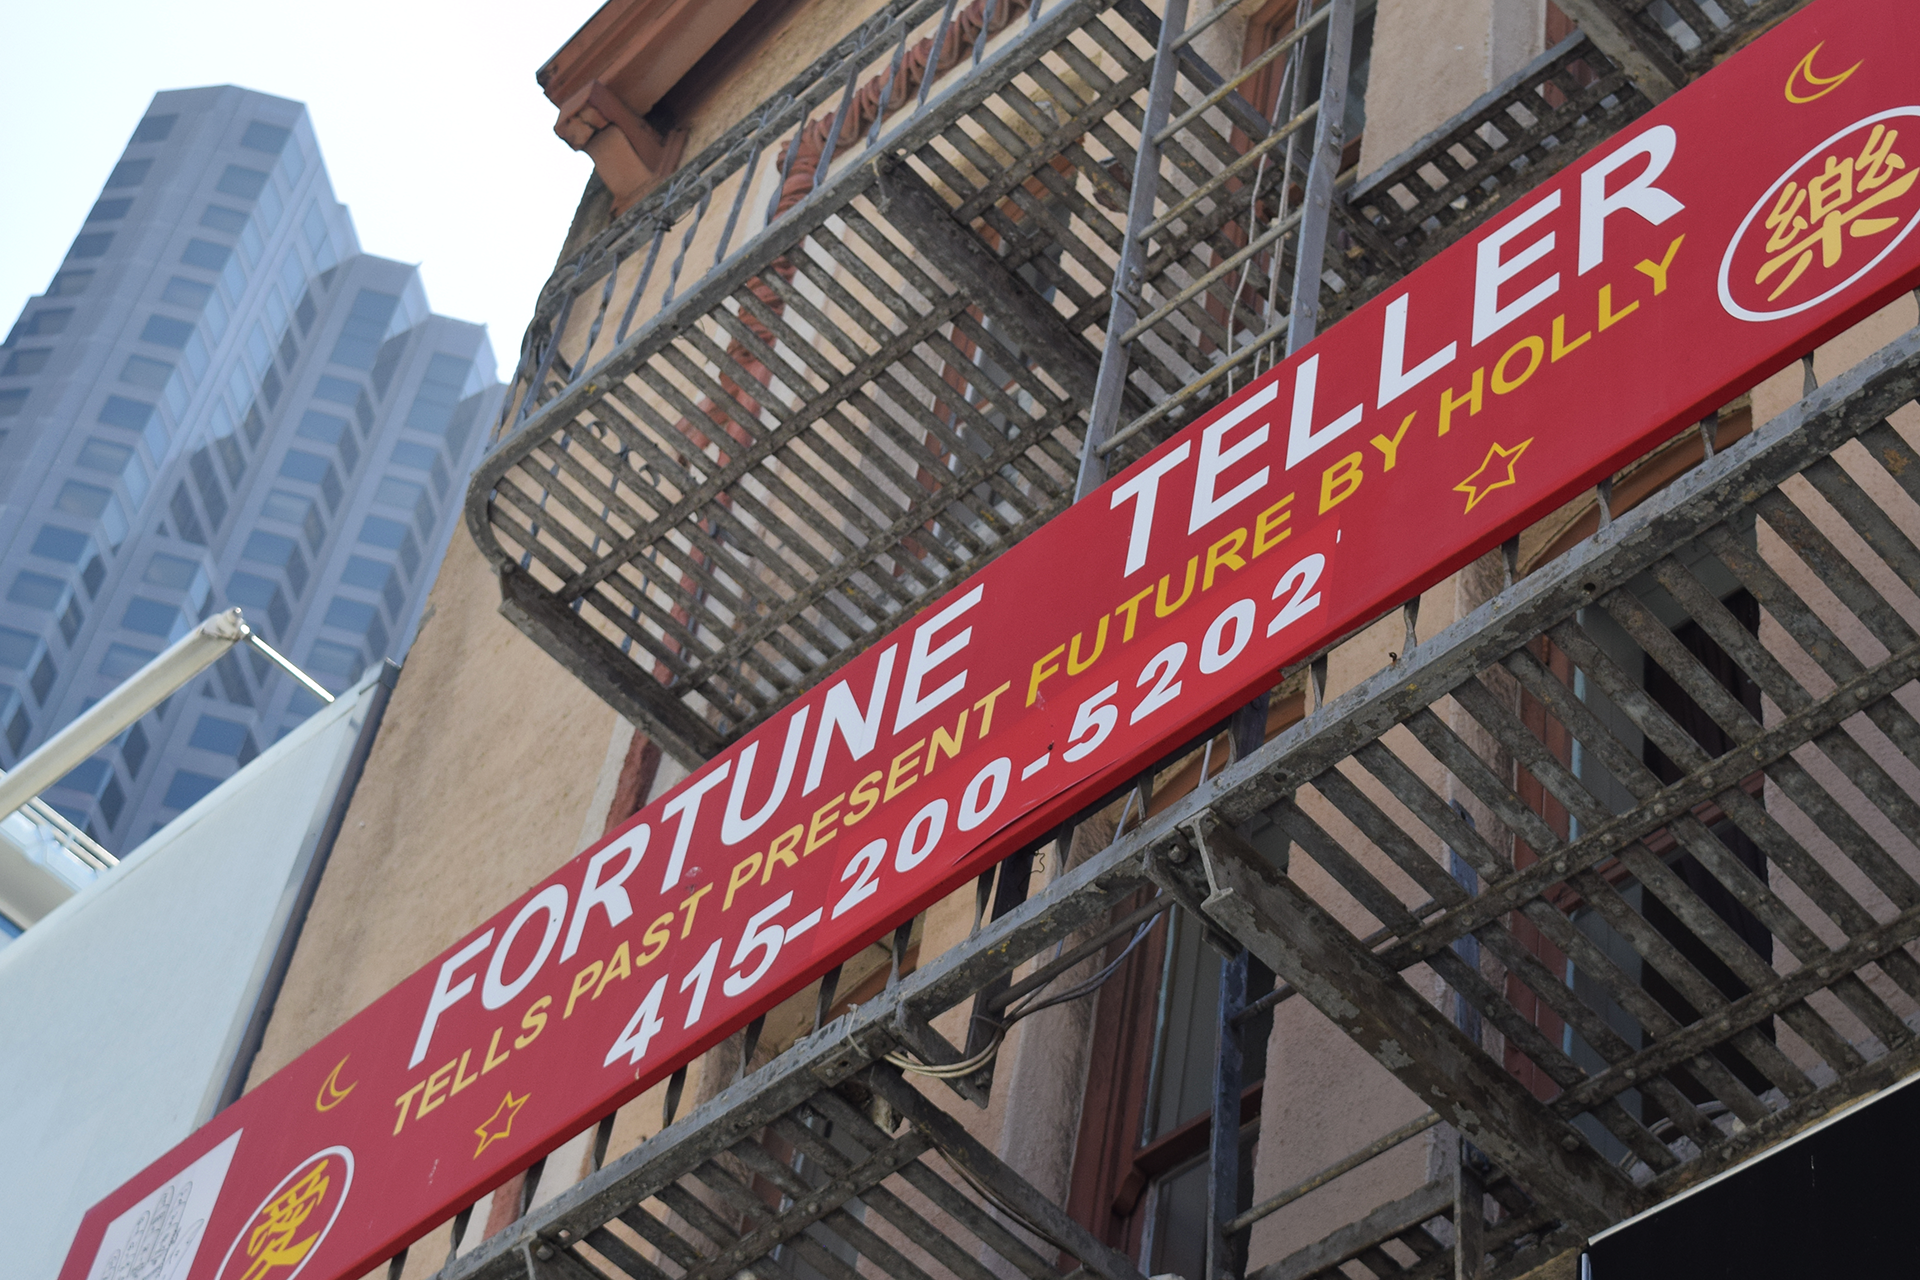 A sign advertises fortunetelling services in San Francisco Carly Severn/KQED